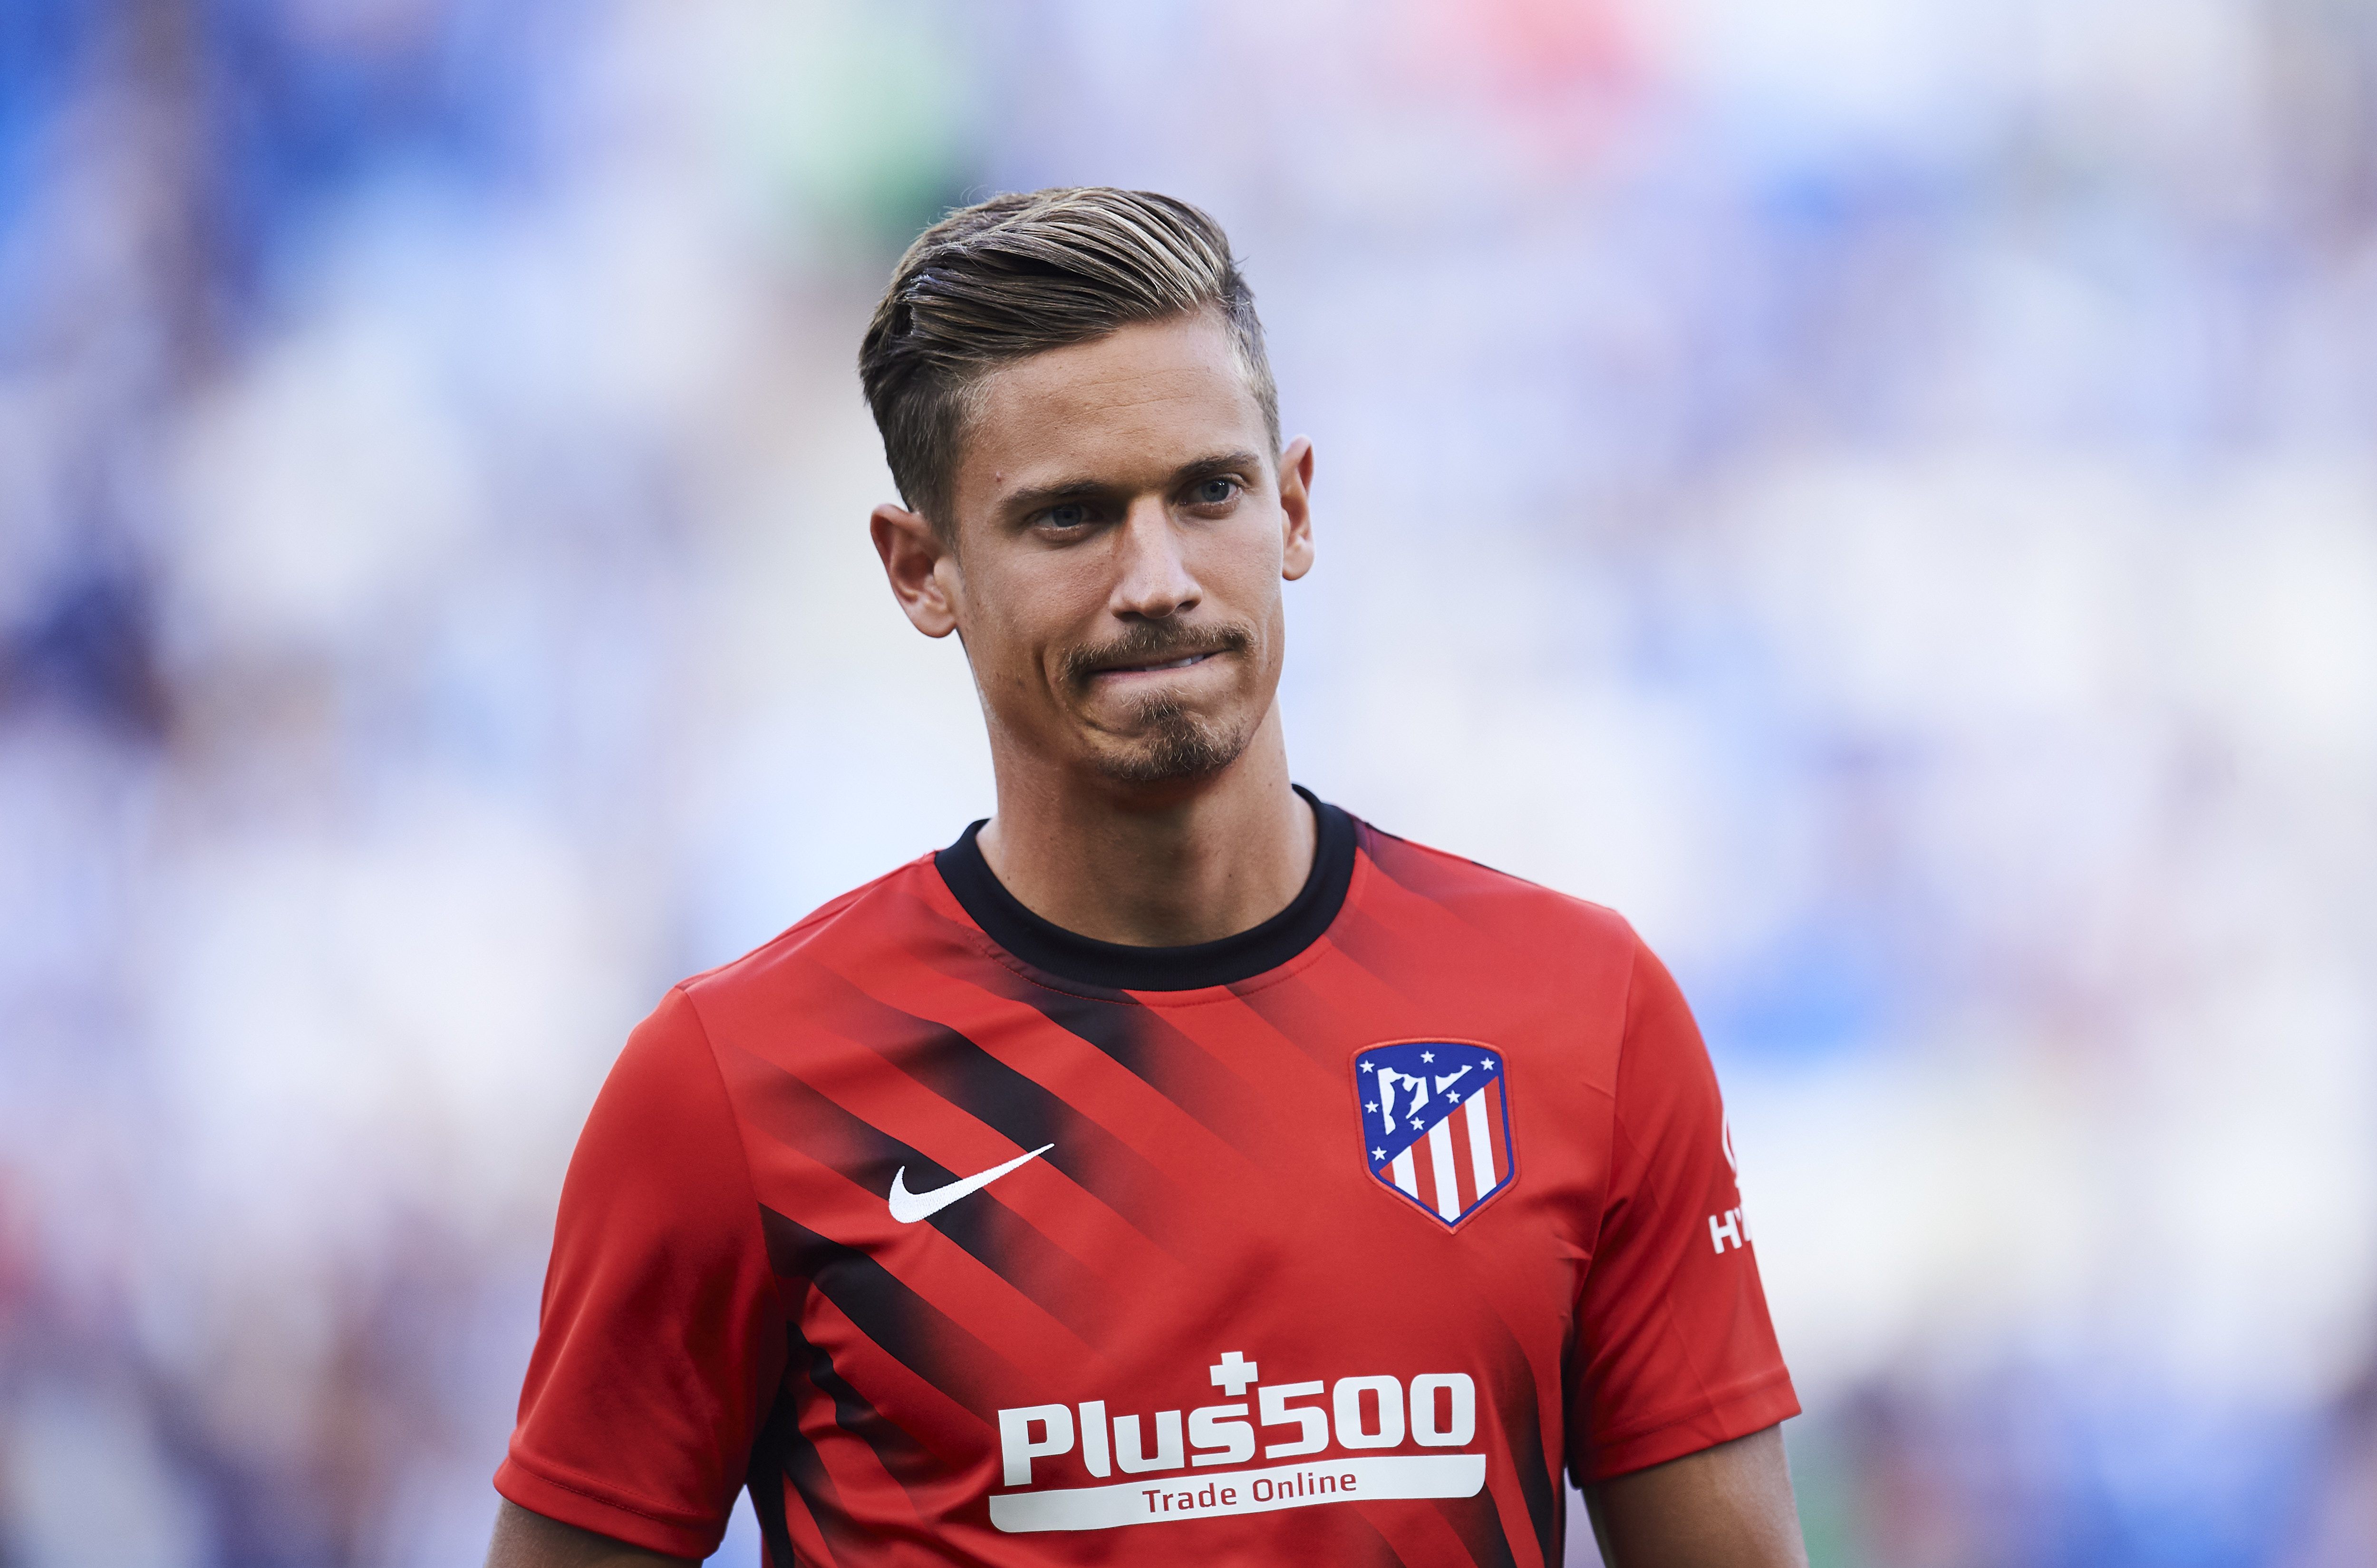 SAN SEBASTIAN, SPAIN - SEPTEMBER 14: Marcos Llorente of Atletico de Madrid looks on prior to the warm up during the Liga match between Real Sociedad and Club Atletico de Madrid at Estadio Reale Arena on September 14, 2019 in San Sebastian, Spain. (Photo by Juan Manuel Serrano Arce/Getty Images)